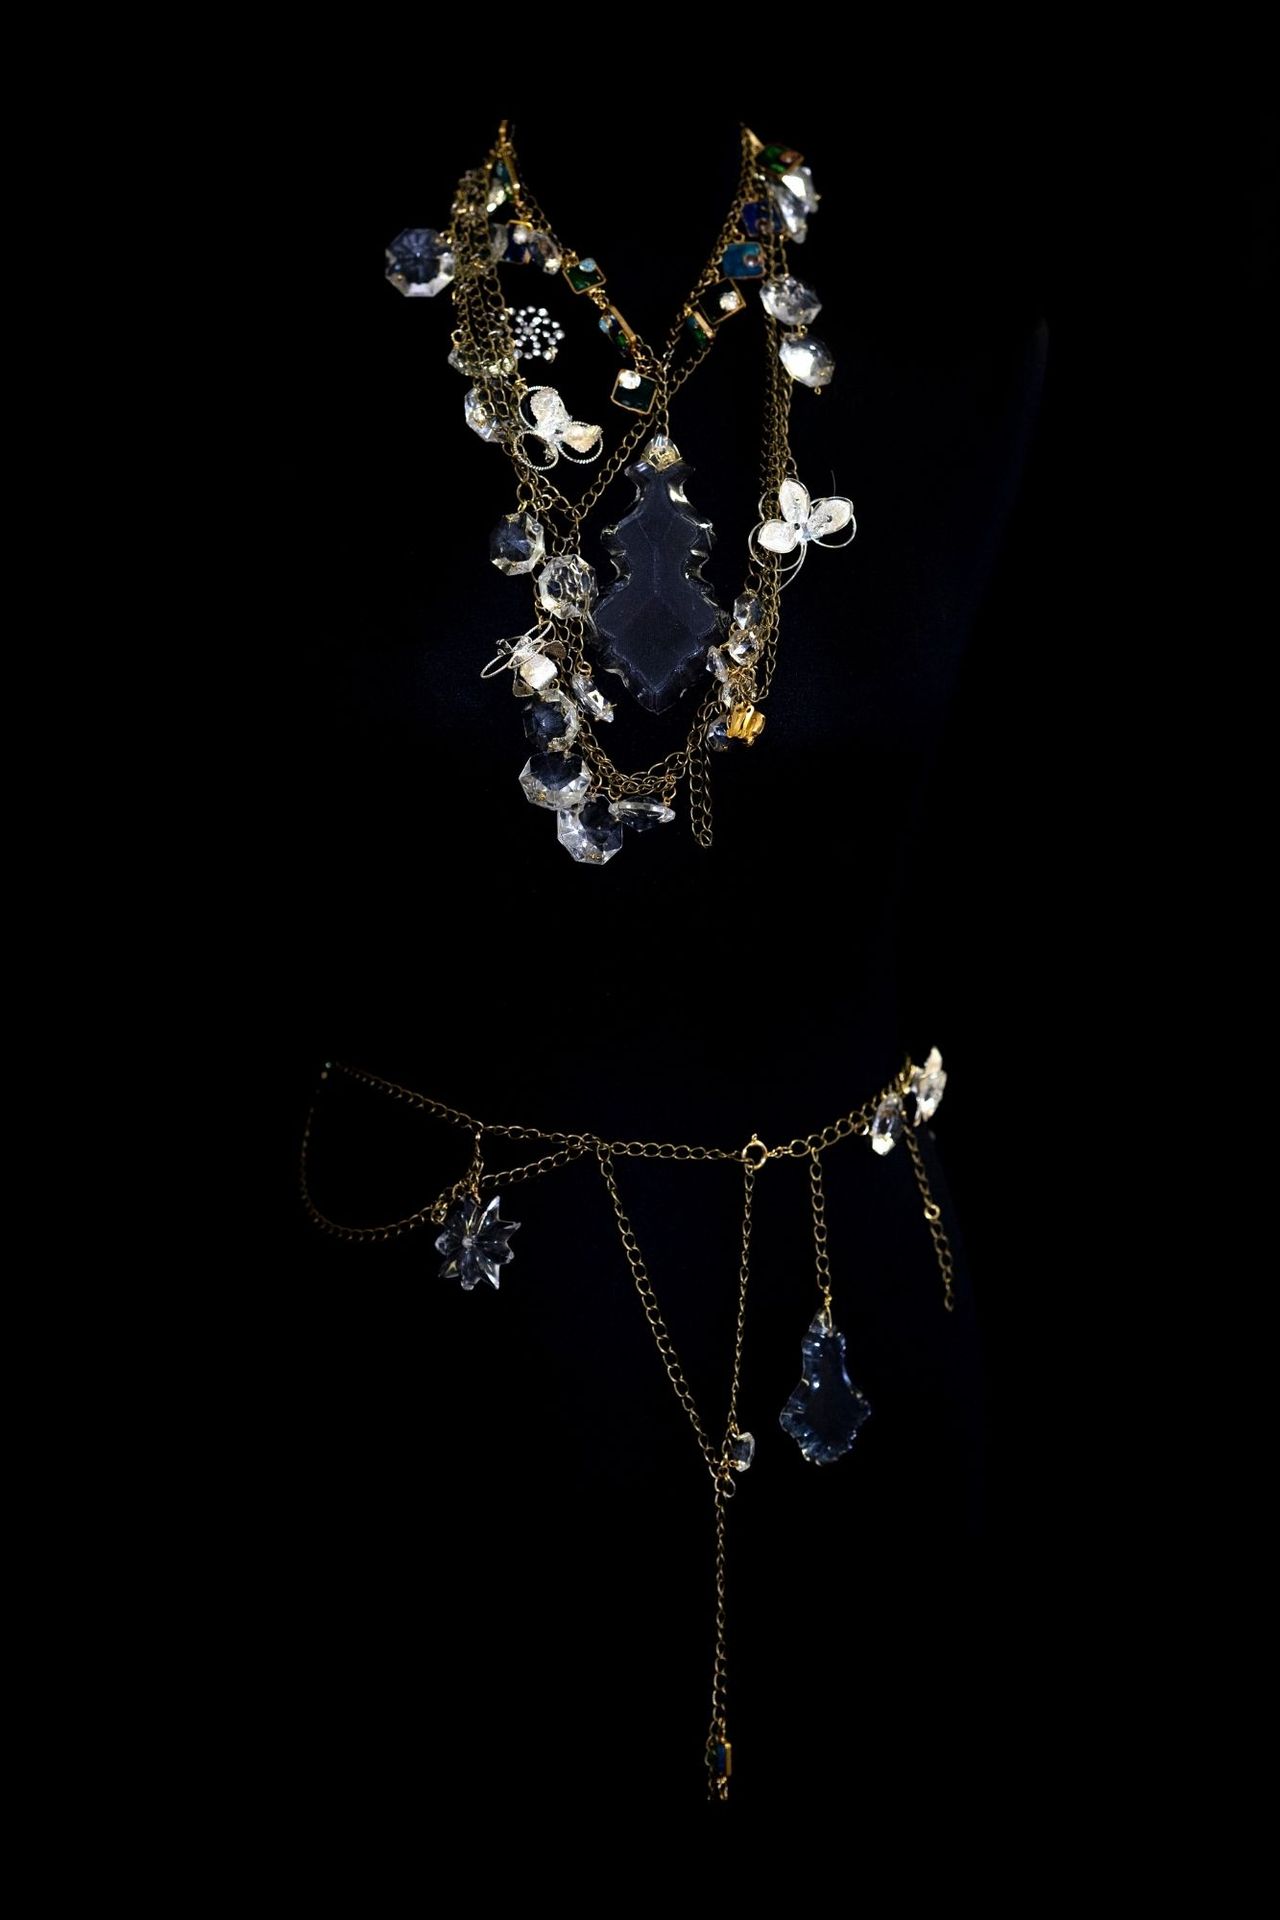 Bijoux de corps "Lumière" Necklace in two parts with tassels and white and blue &hellip;